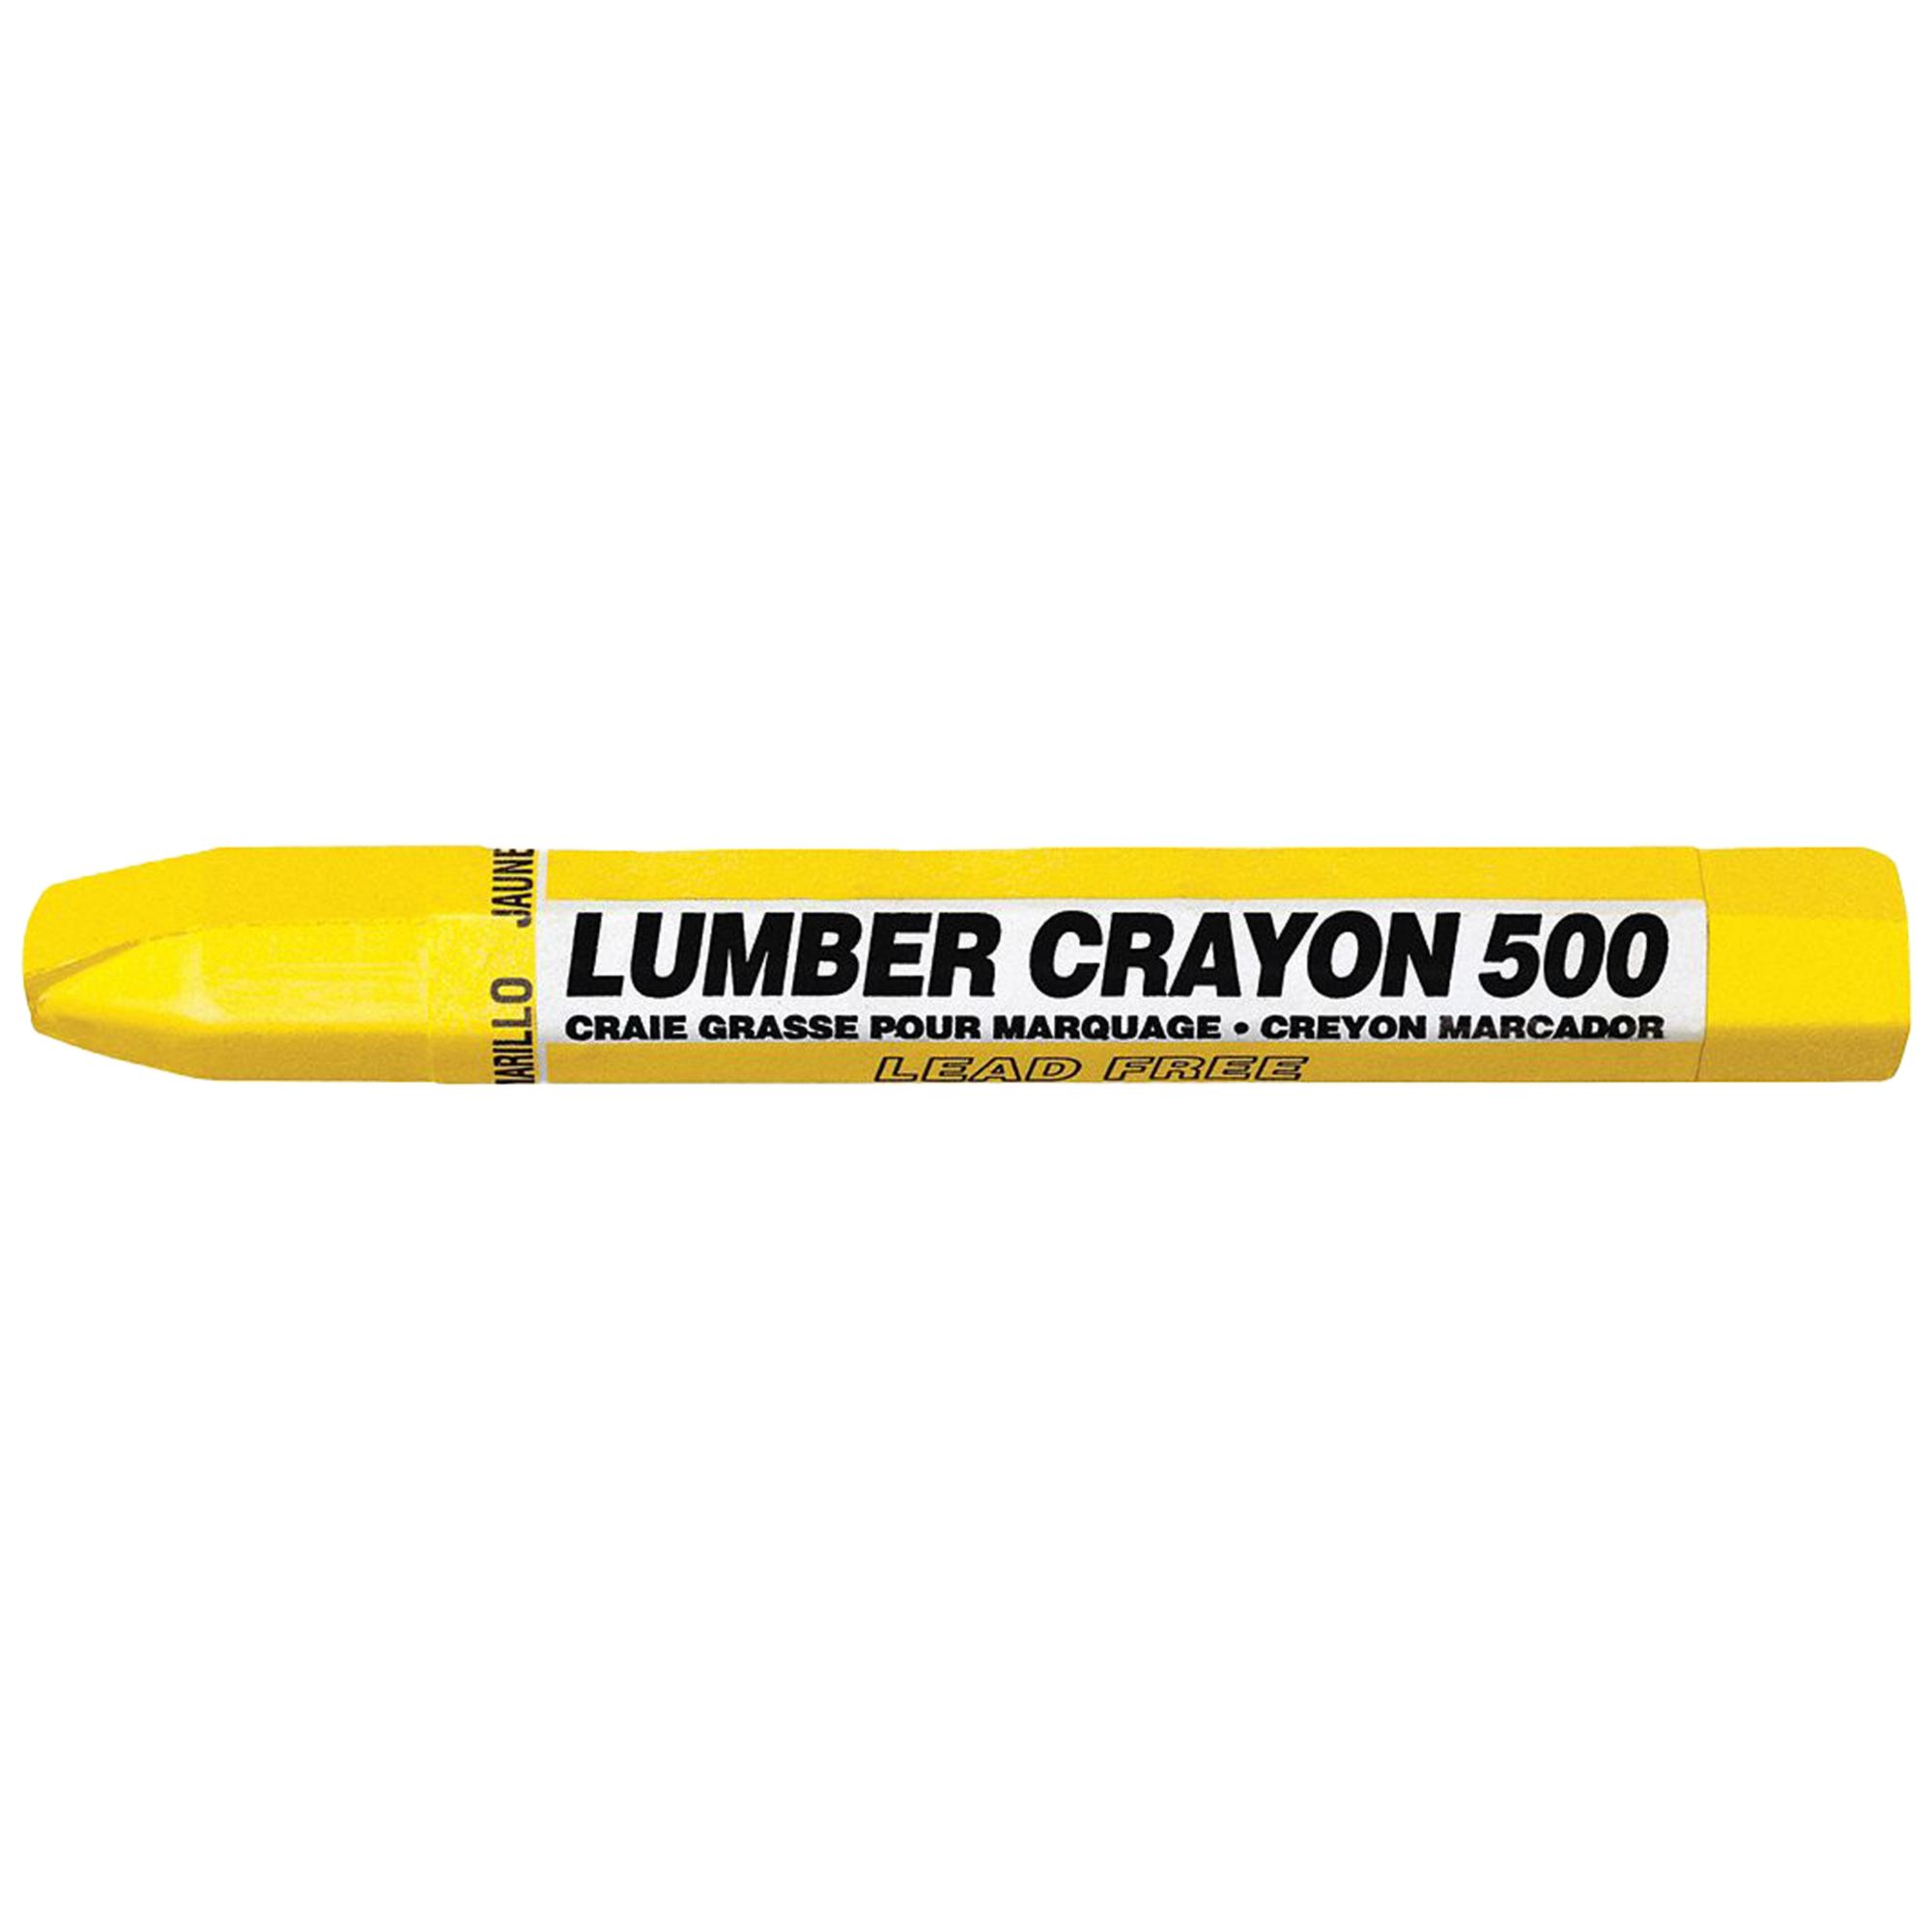 LUMBER CRAYON ORANGE - REPLACES LCGPINK - Shannon Supply